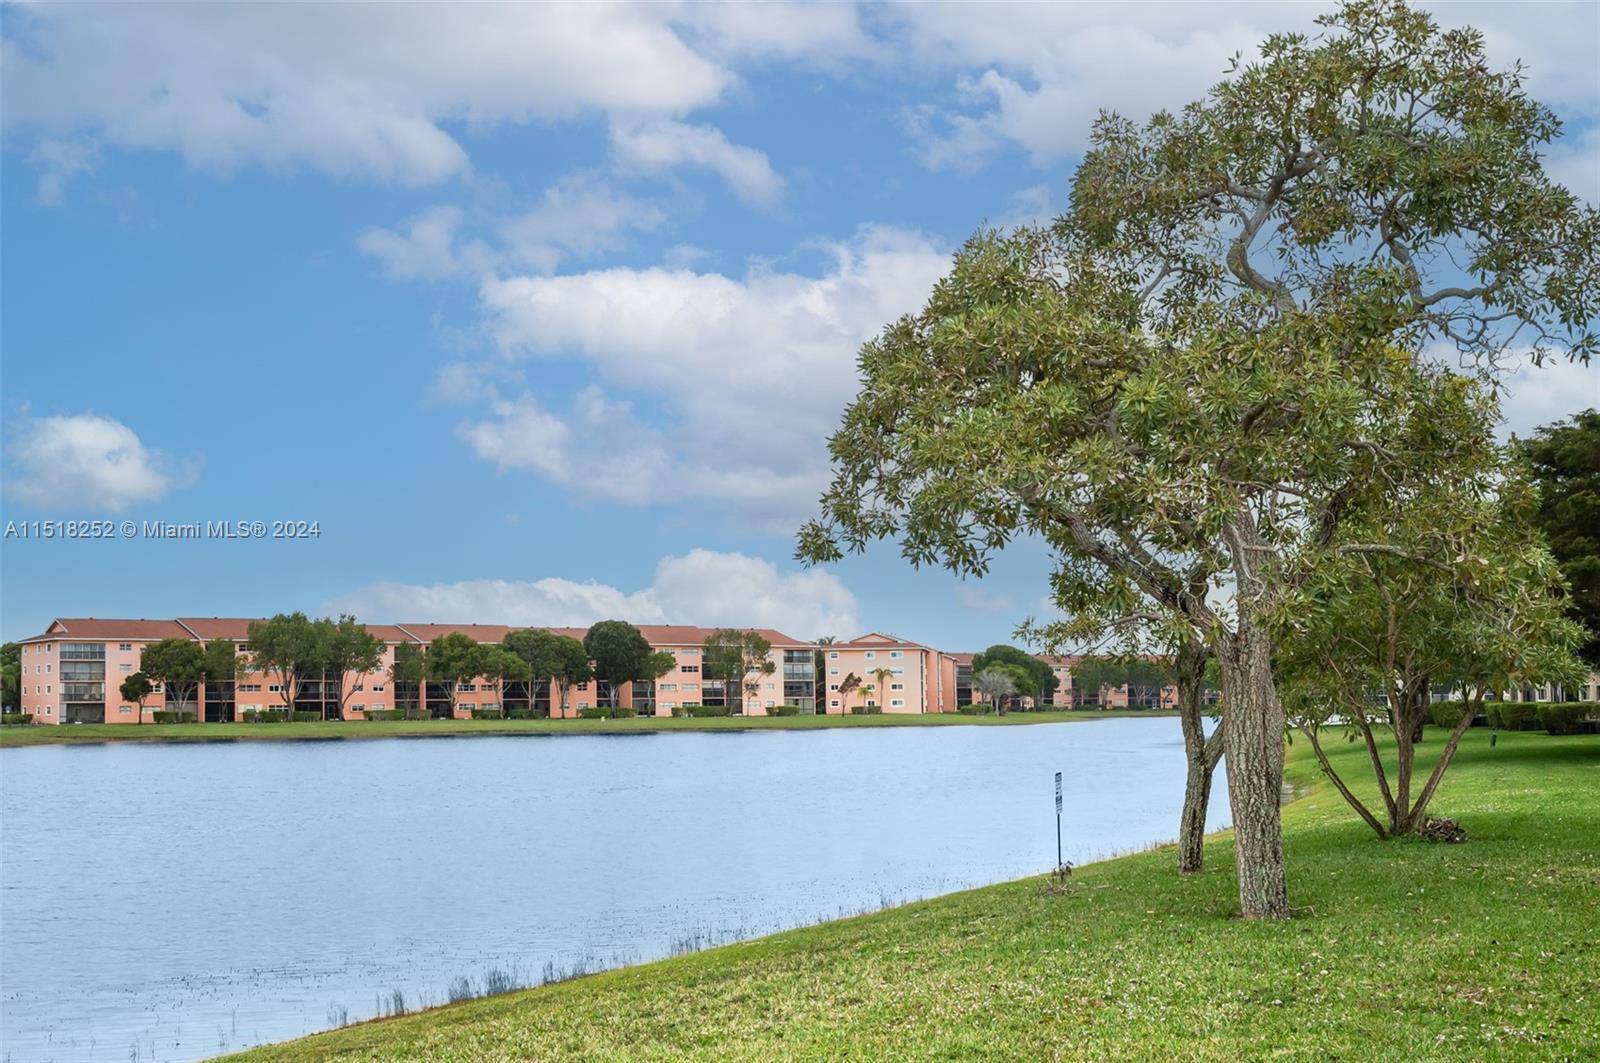 Stunning unit with lake view in Century Village, flawless 2 2 apartment with a lot of light and room to entertain, split bedroom floor plan.